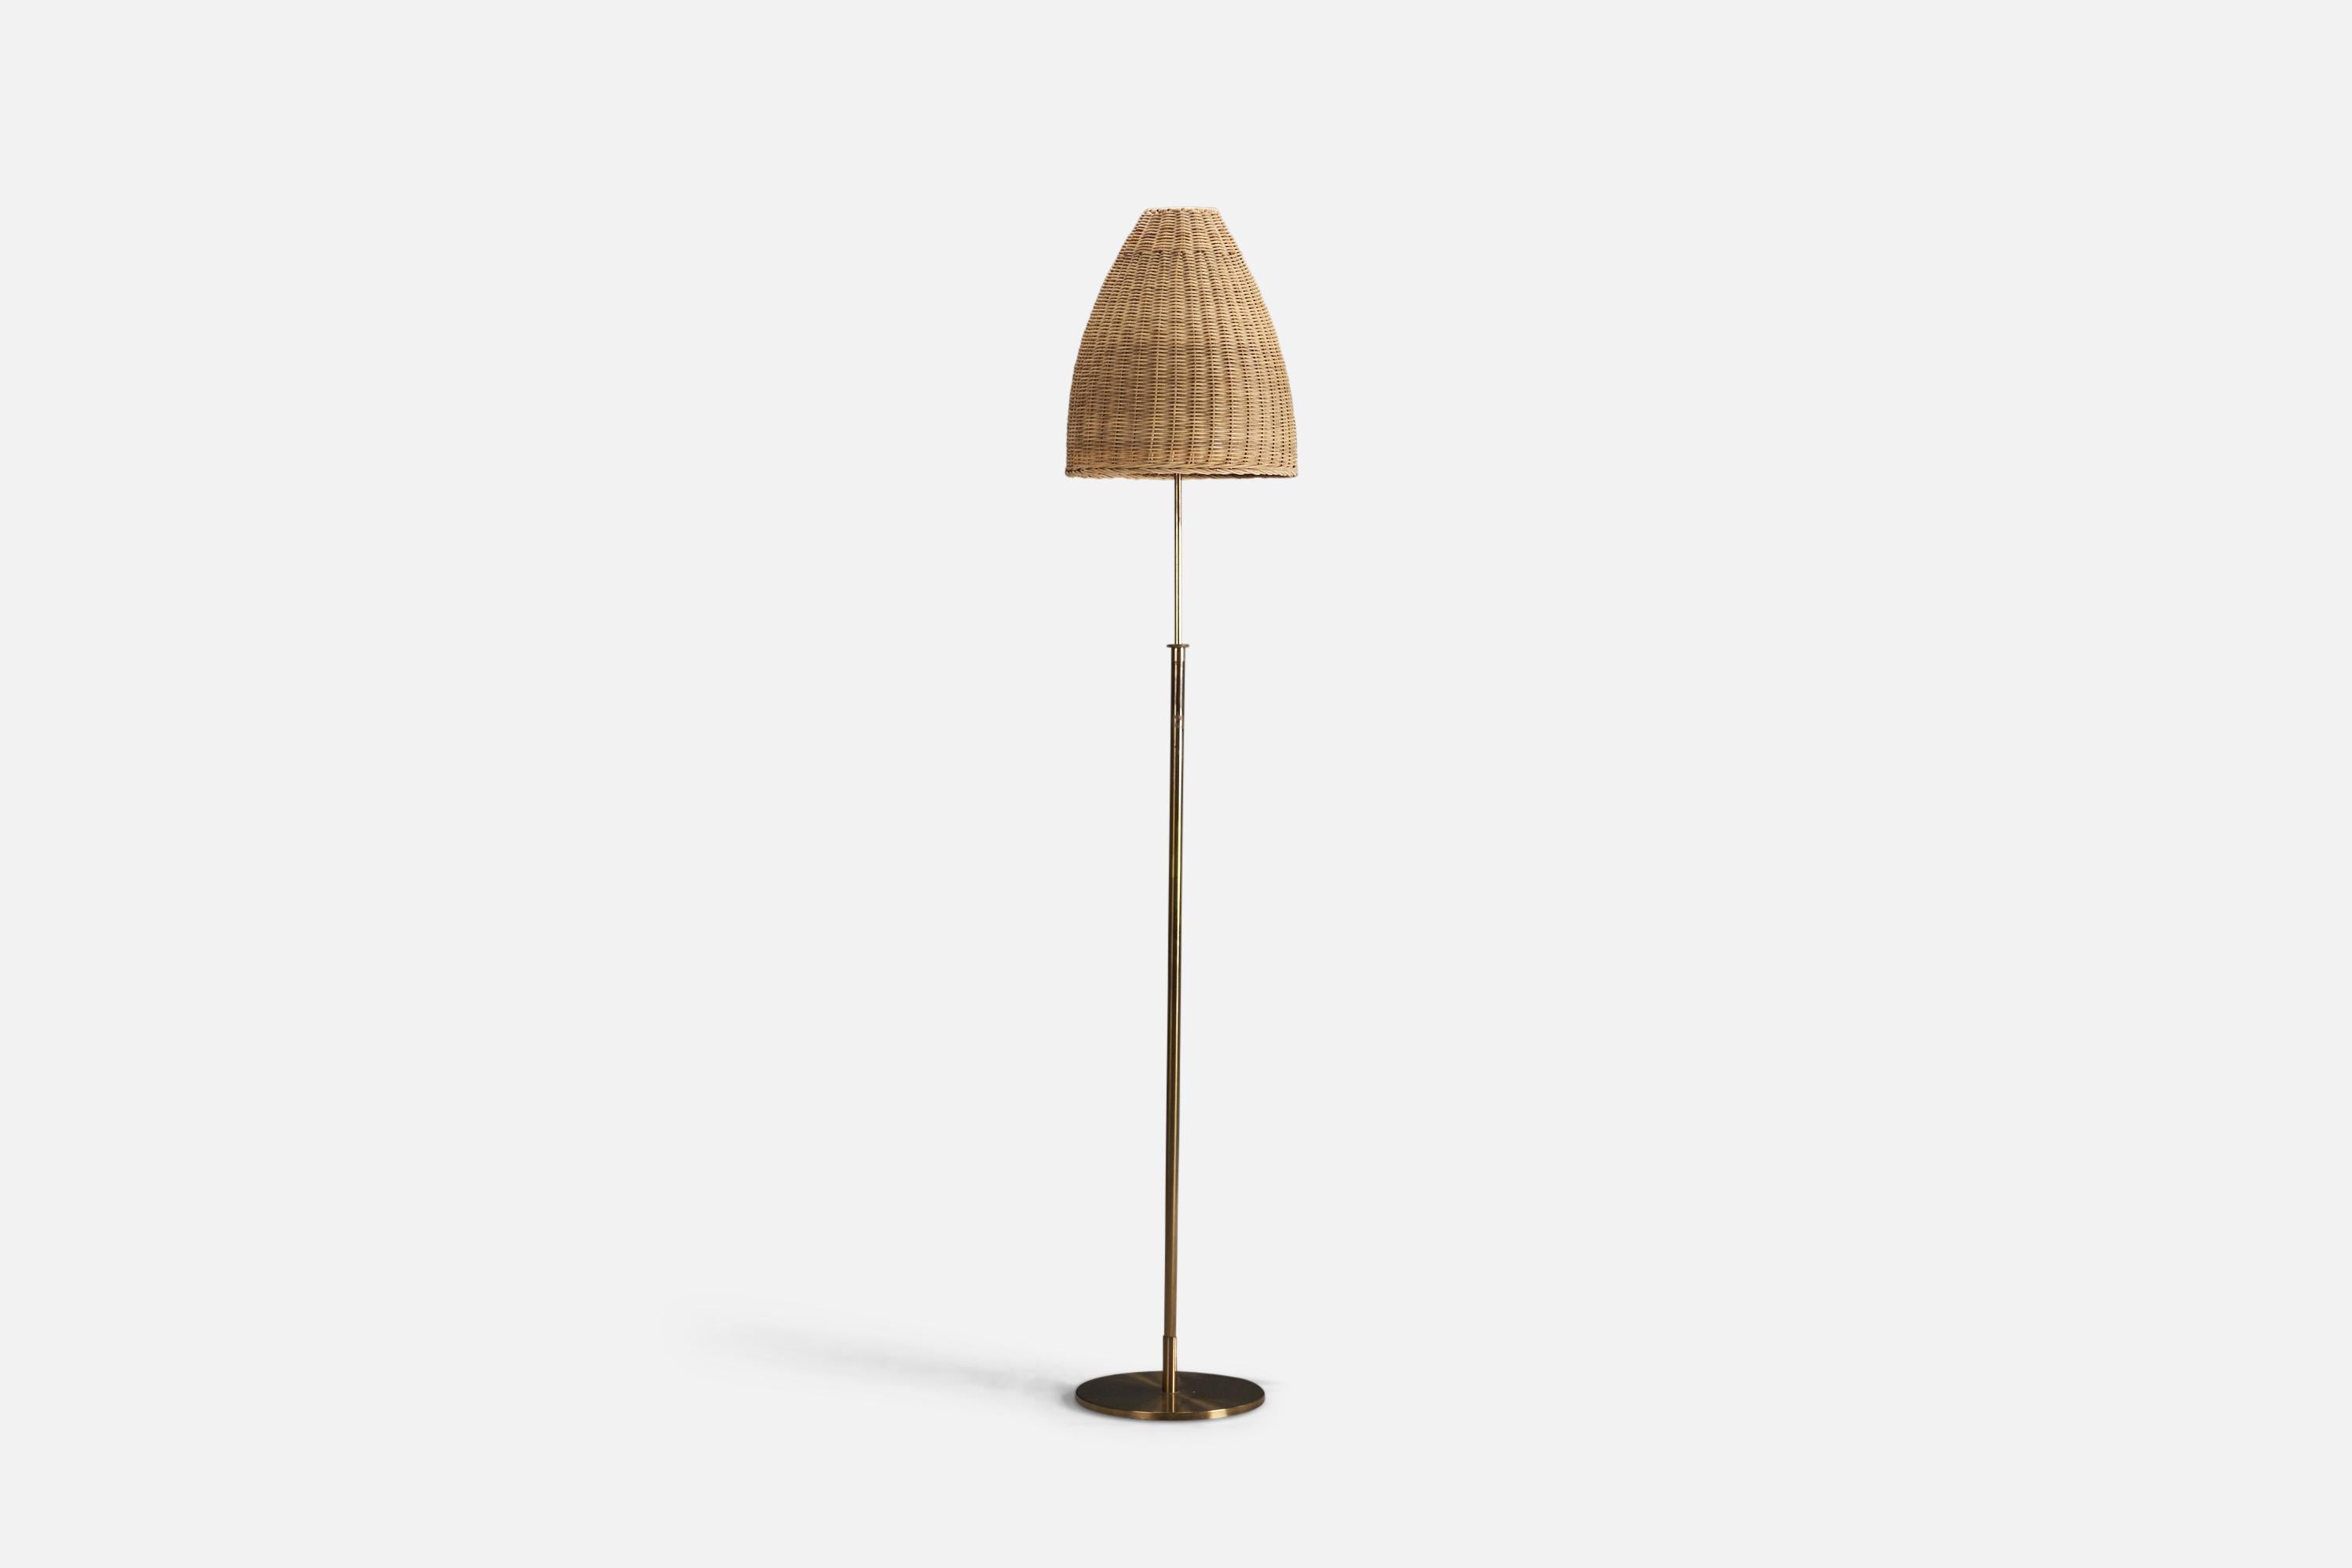 A brass and rattan floor lamp designed and produced by H.W. Armatur, Sweden, 1940s.

Socket takes standard E-26 medium base bulb.

There is no maximum wattage stated on the fixture.